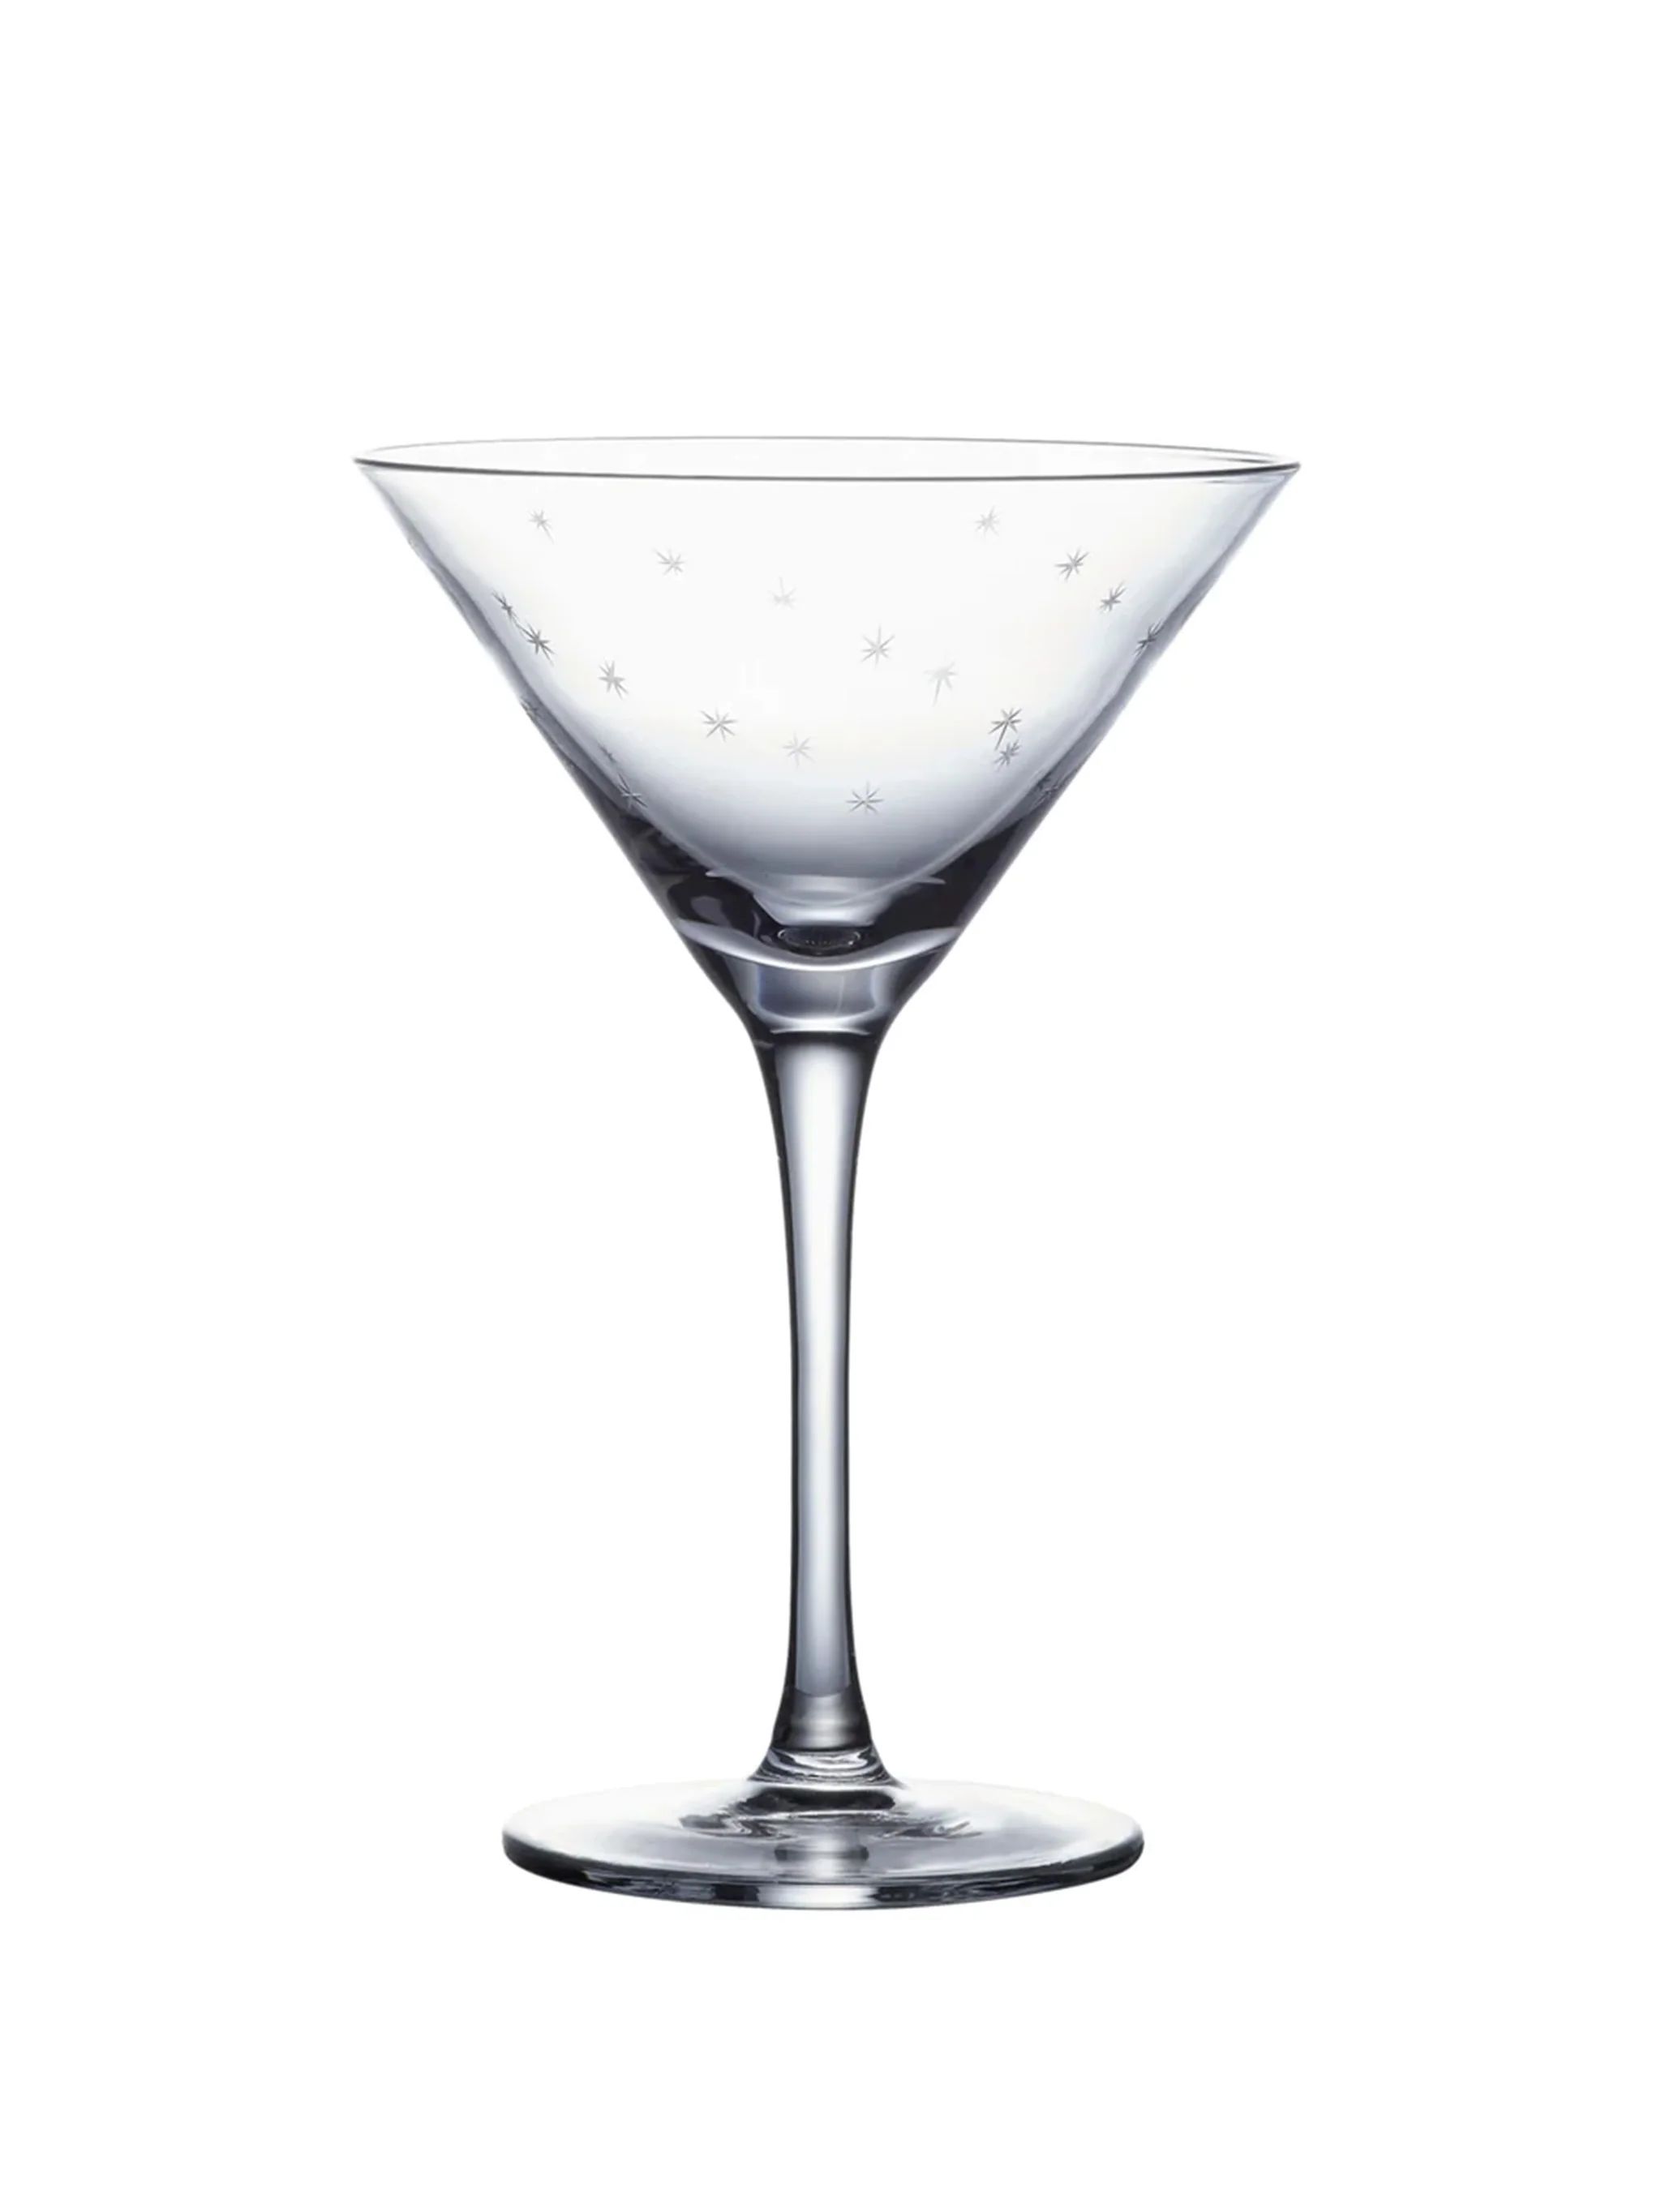 Crystal Martini Glasses with Stars | Weston Table